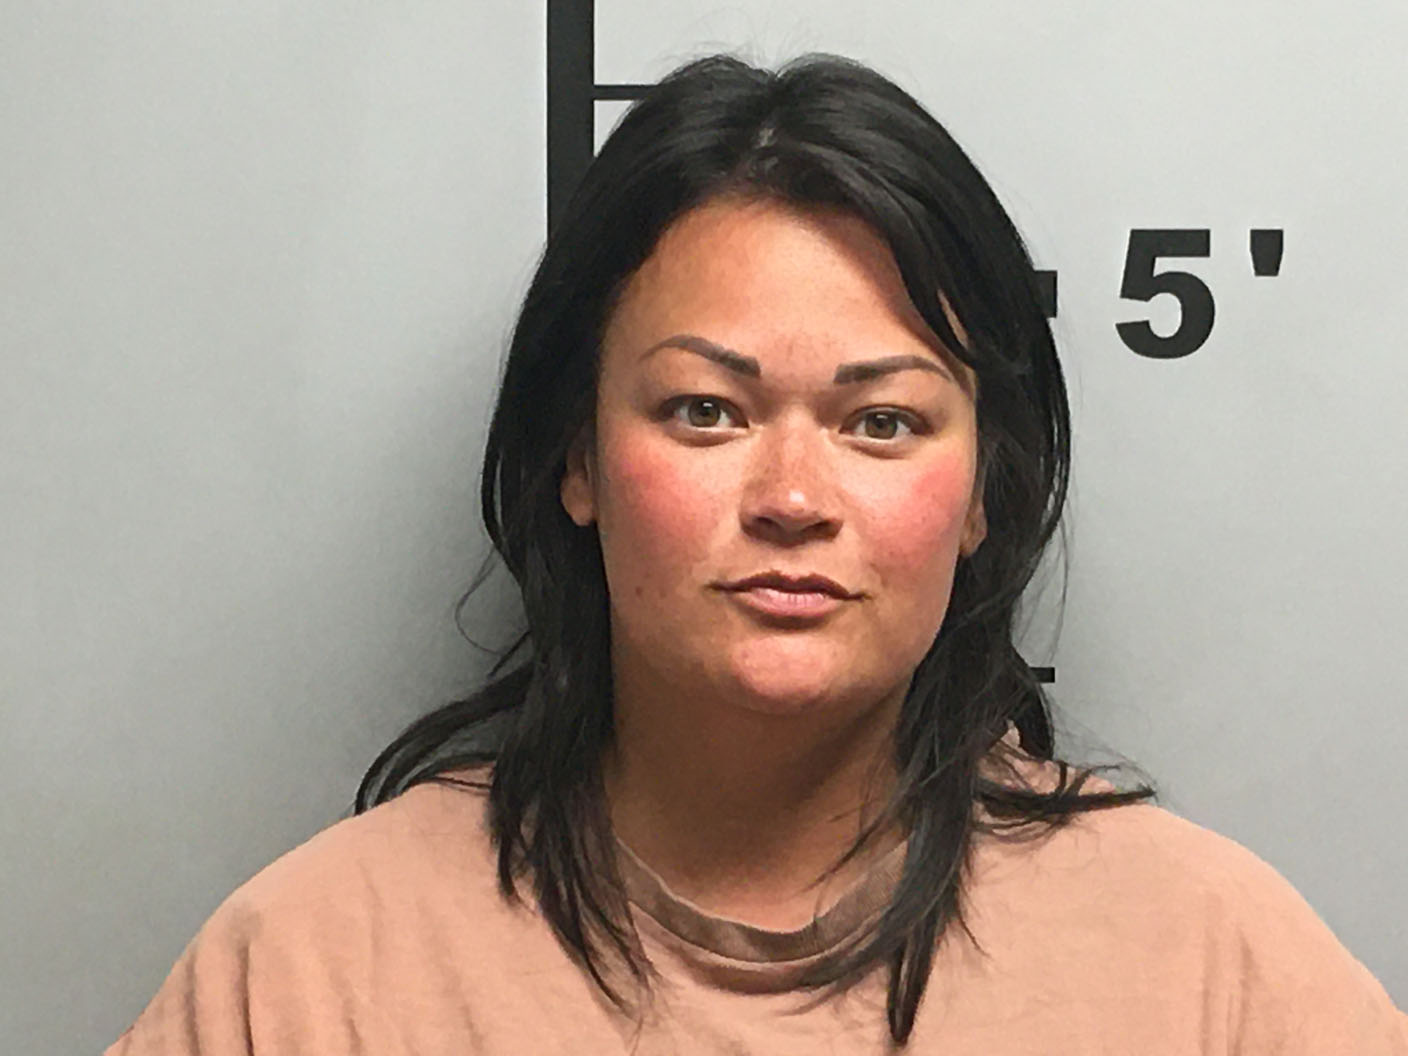 Rogers woman arrested, accused of having sex with 15-year-old picture photo